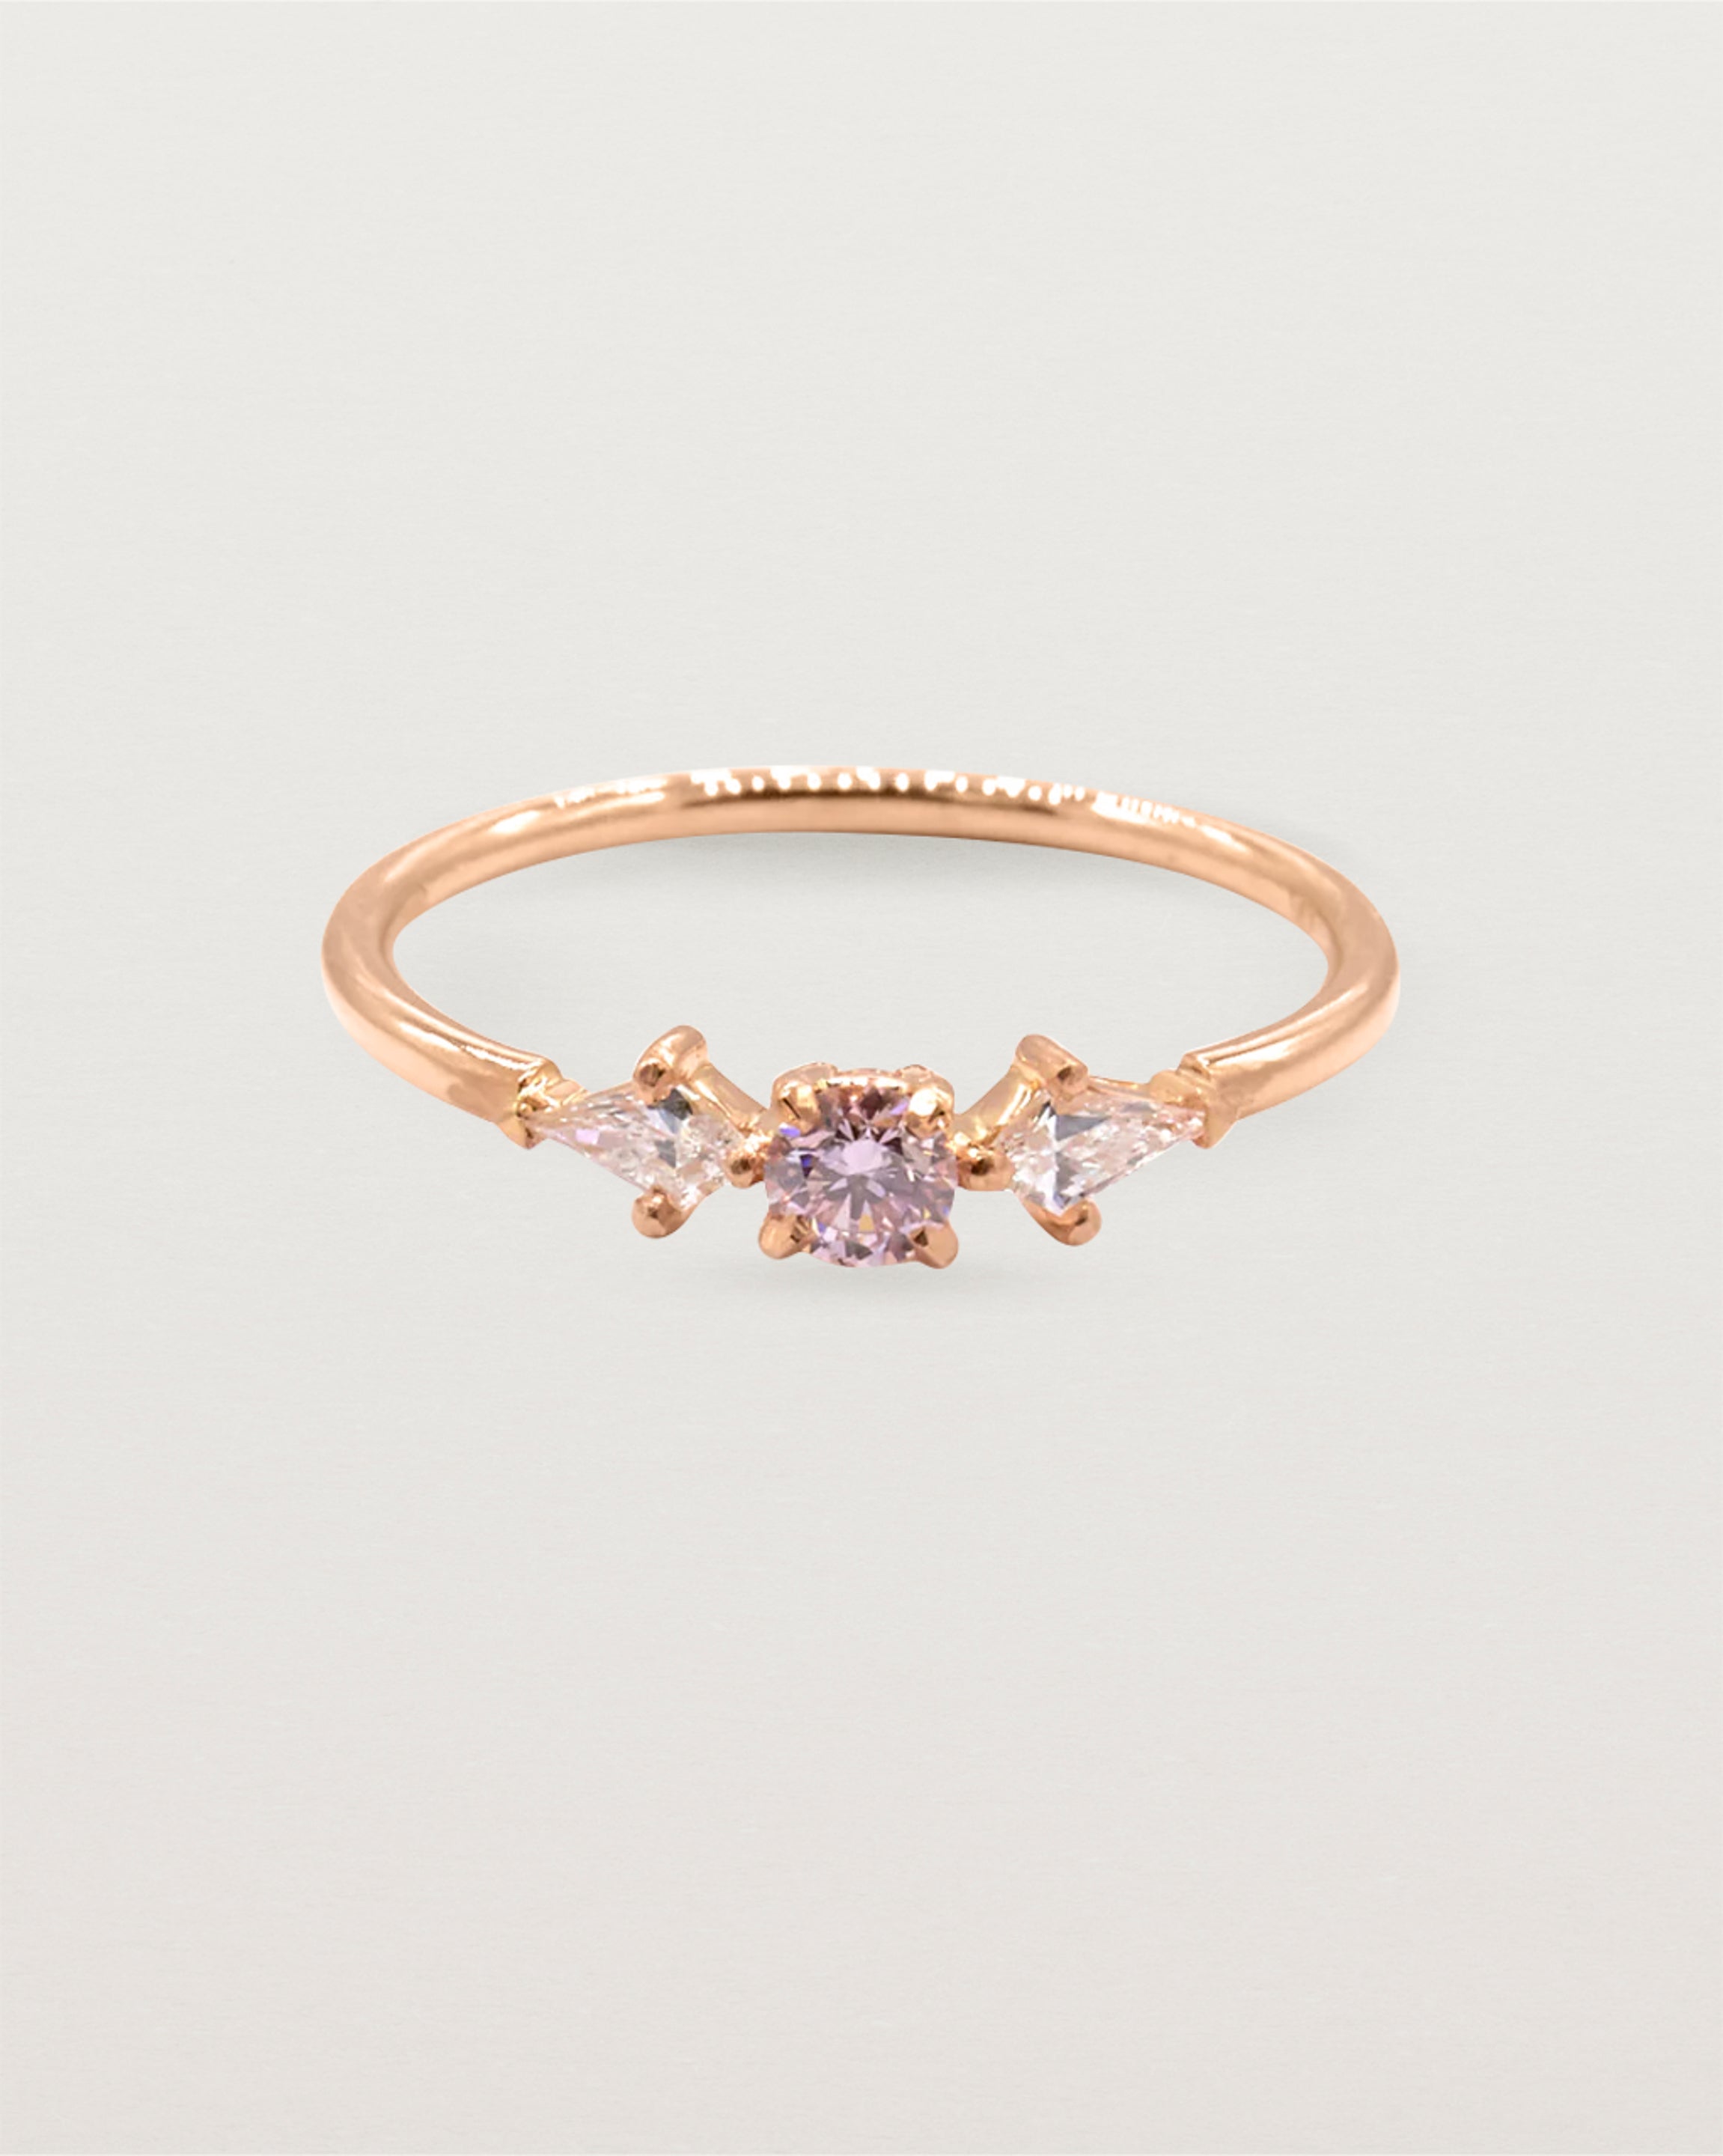 A blush-toned, certified Argyle pink diamond sits between two bright white kite shaped diamonds on a fine round band.